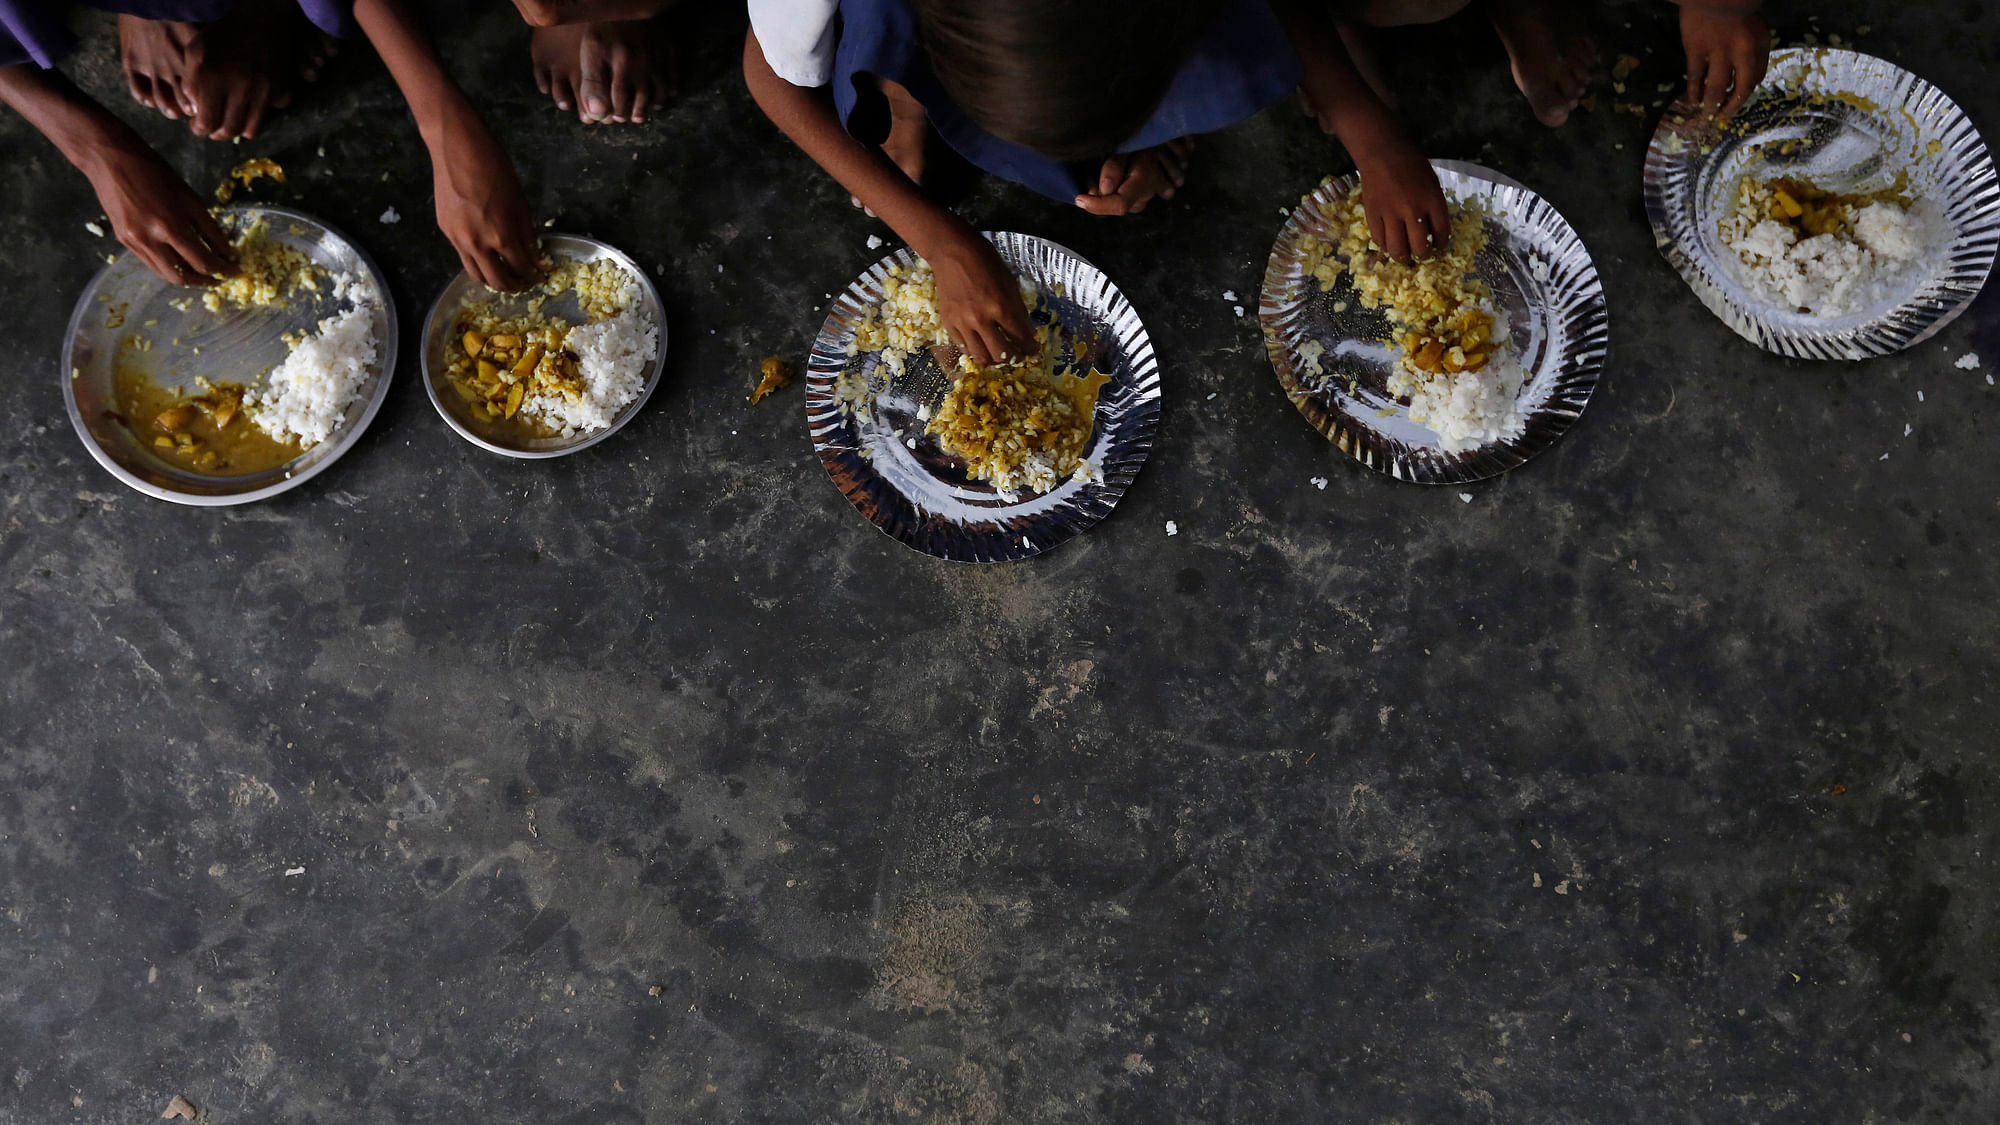 More than 50,000 children in 32 government-aided schools in Punjab were not served mid-day meals. (Photo: Reuters)